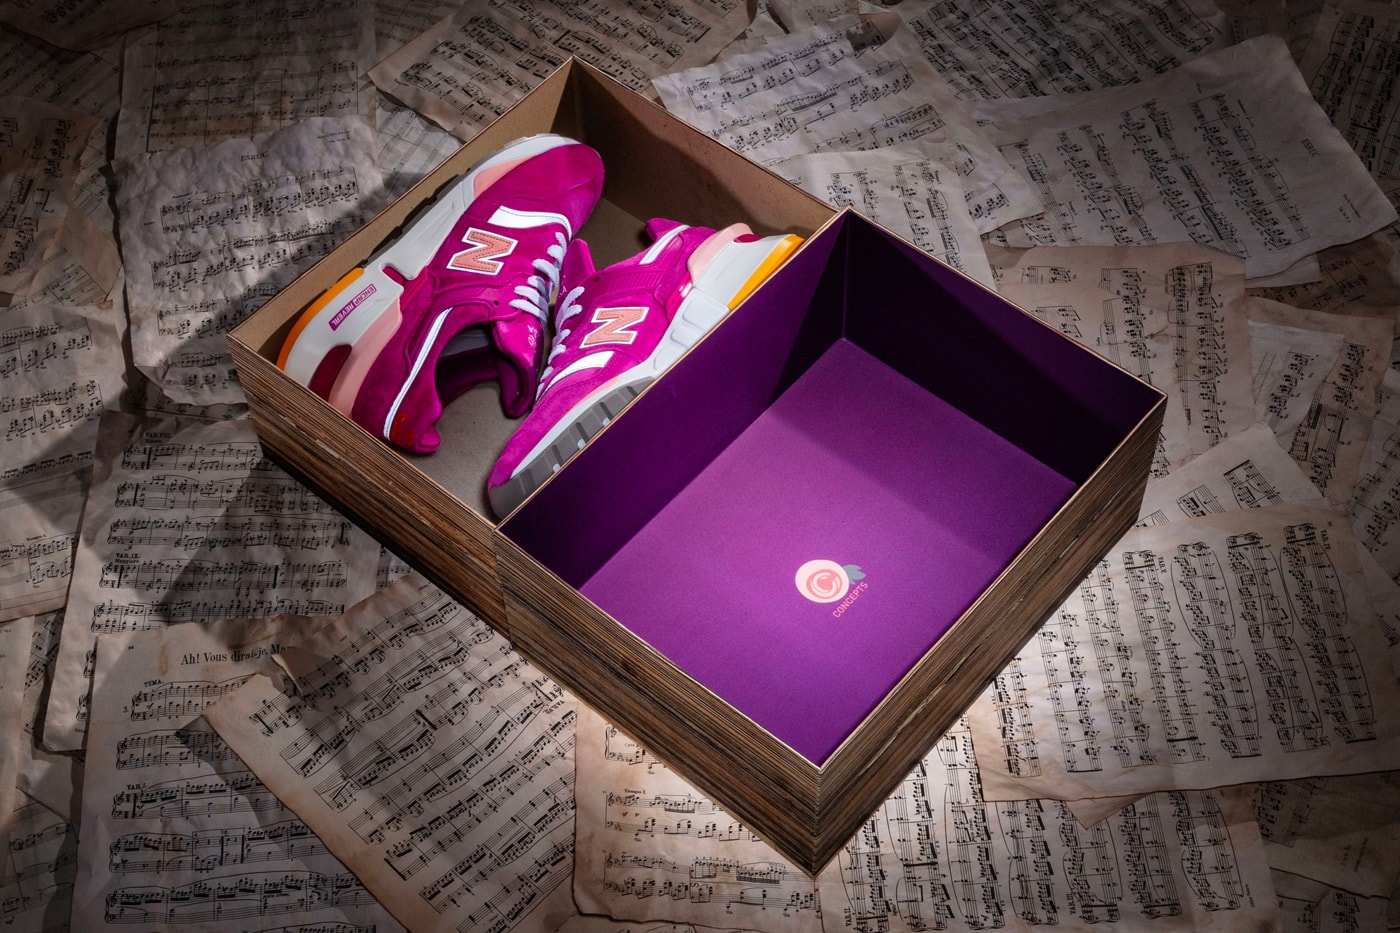 Concepts New Balance 997S Fusion ESRUC Release Info pink purple white yellow